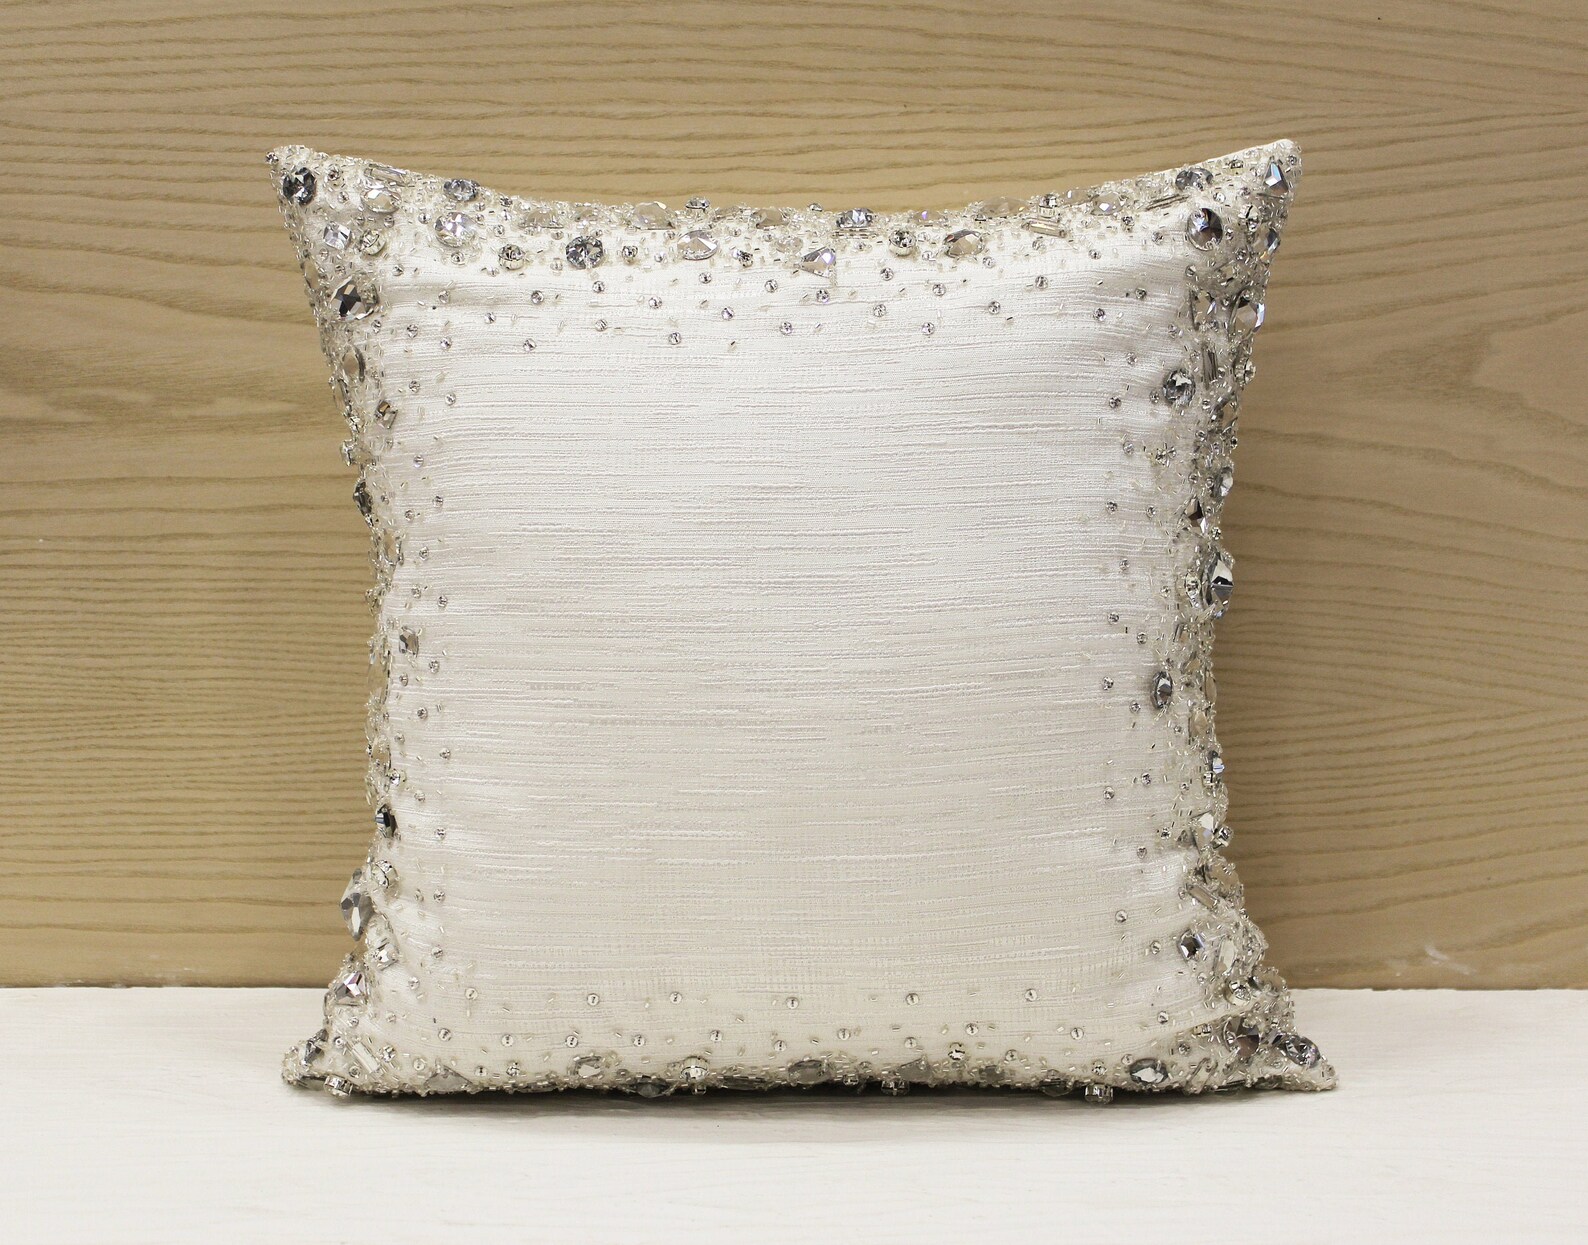 White Bling Crystal Throw Pillow Cover Luxury Contemporary | Etsy